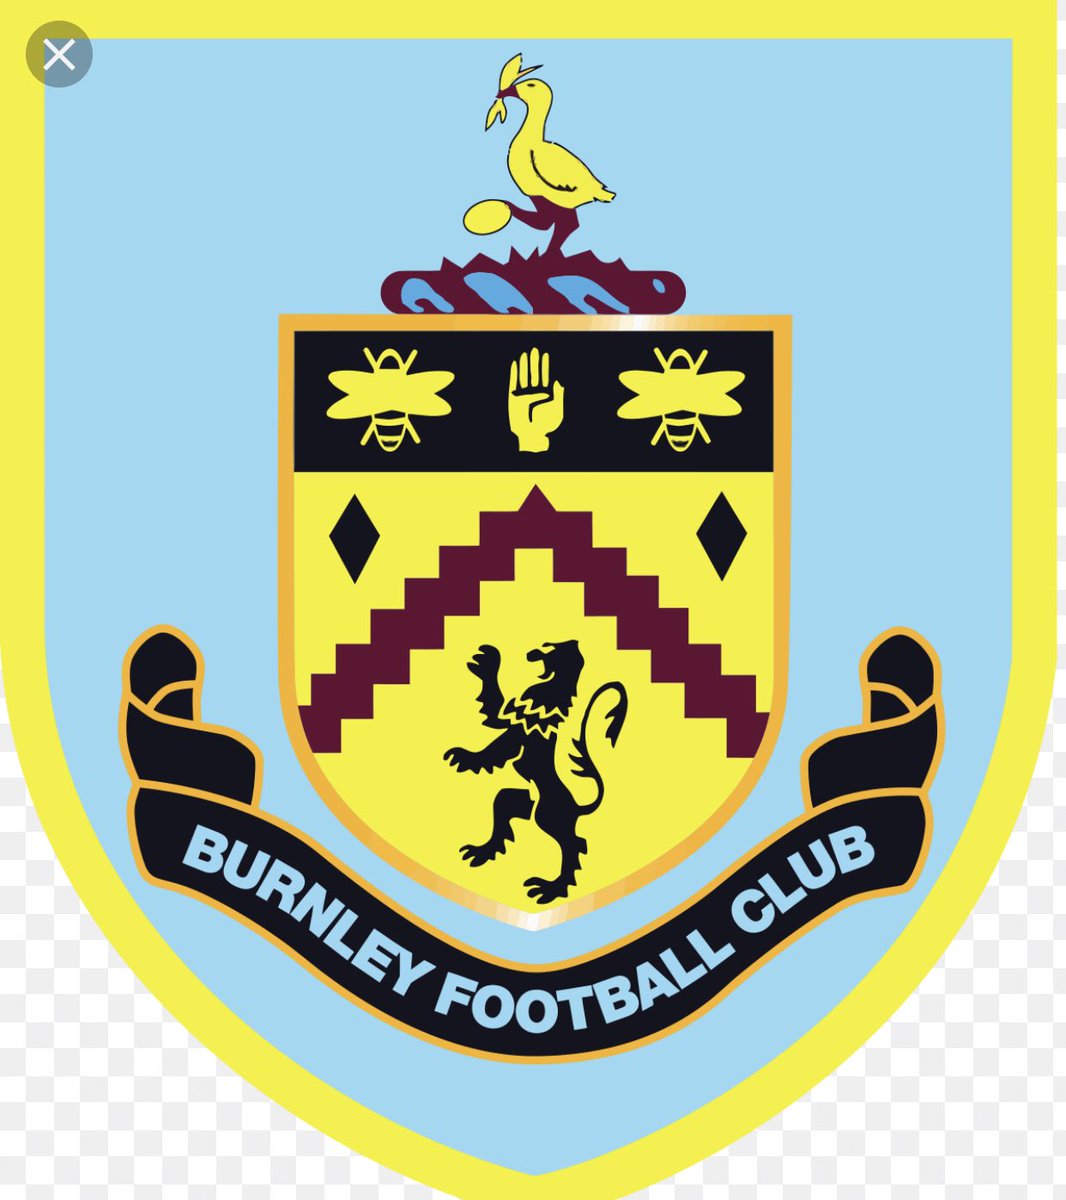 A big thank you to @BurnleyFC_Com for giving us a pair of tickets to today’s match! The Headteacher selected the amazing Aiden C! Come on Burnley! #football #awards #community